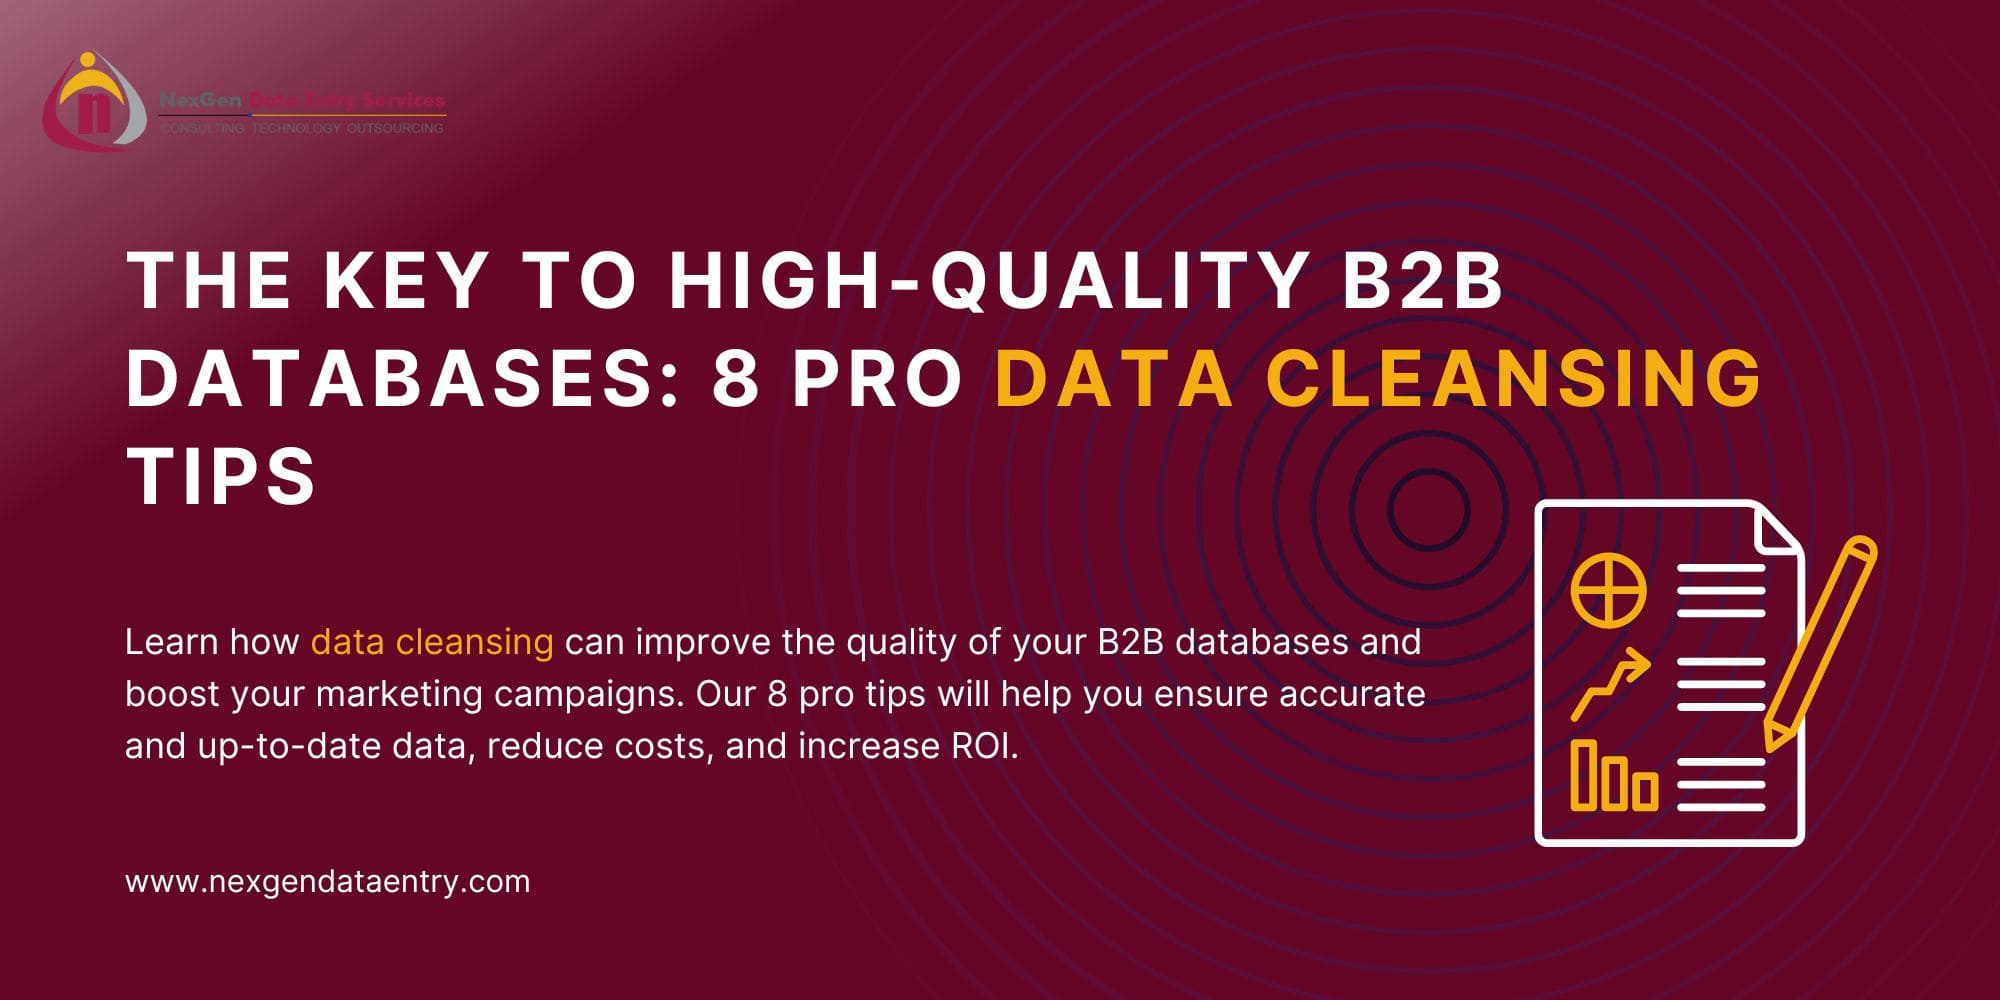 The Key to High-Quality B2B Databases 8 Pro Data Cleansing Tips